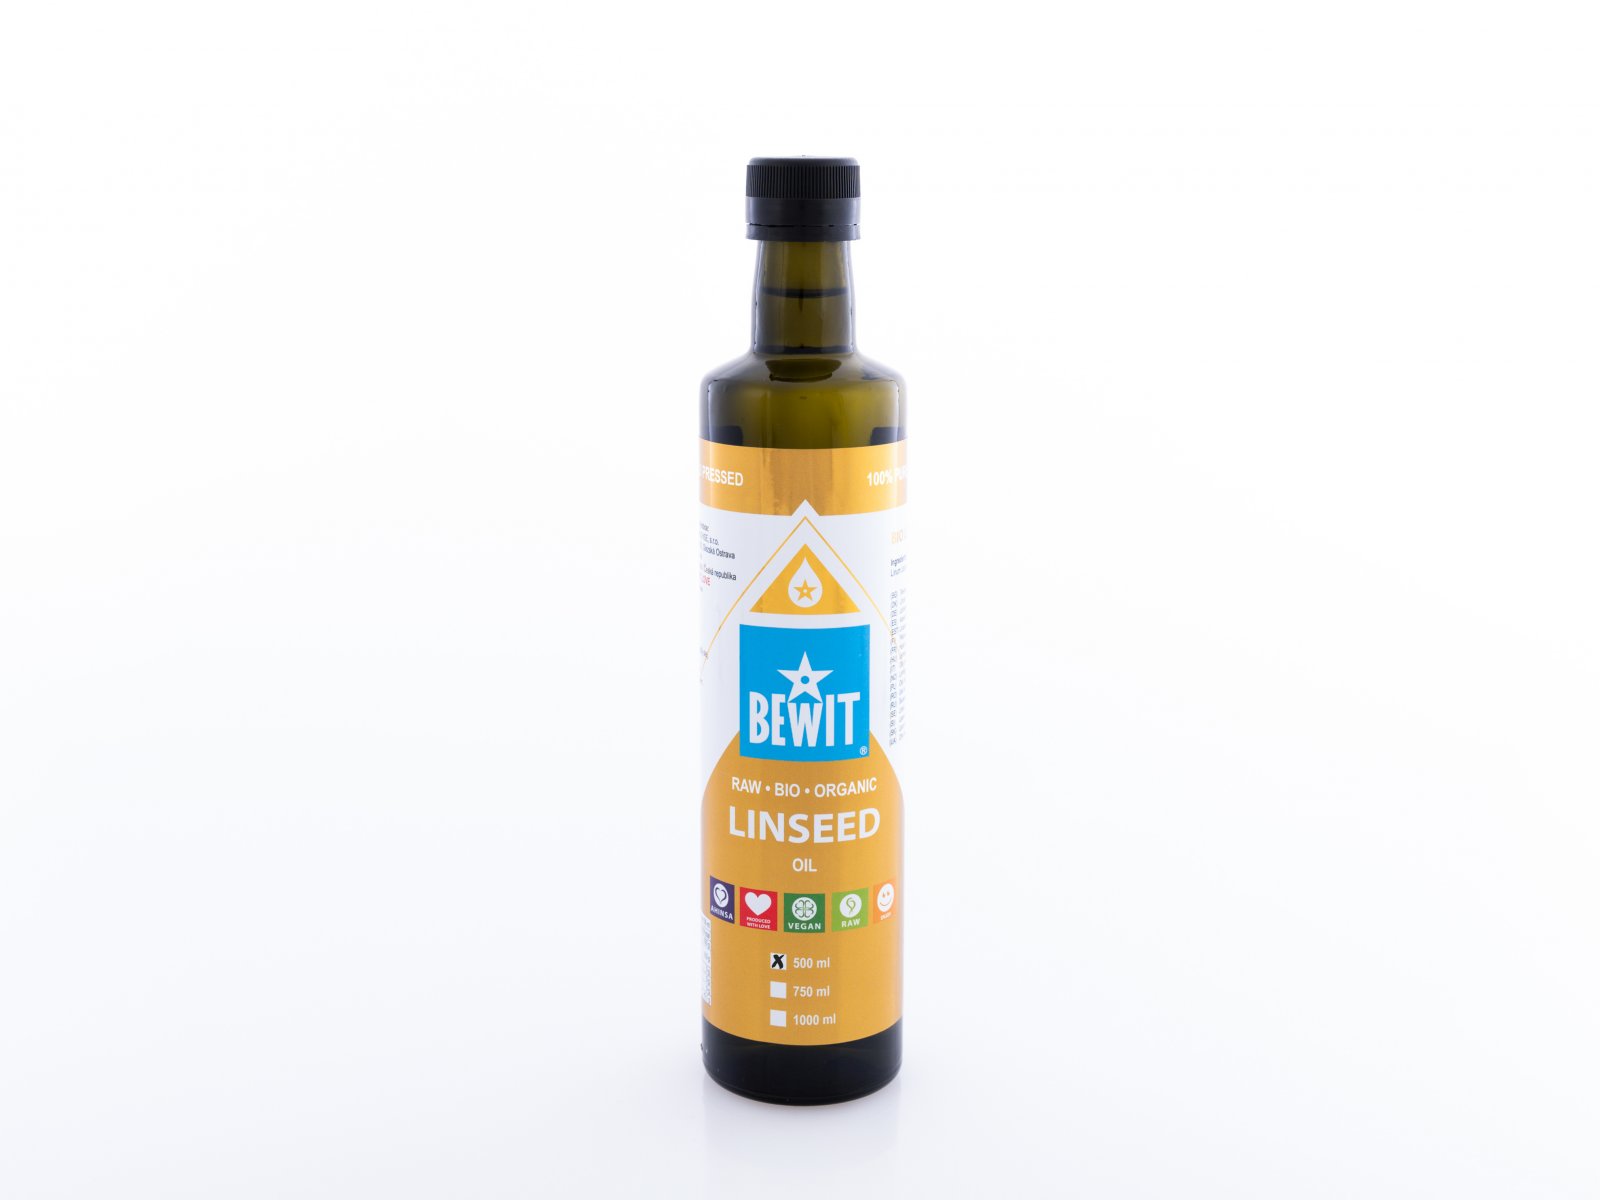 BEWIT Linseed oil ORGANIC  - A fresh Bio quality oil